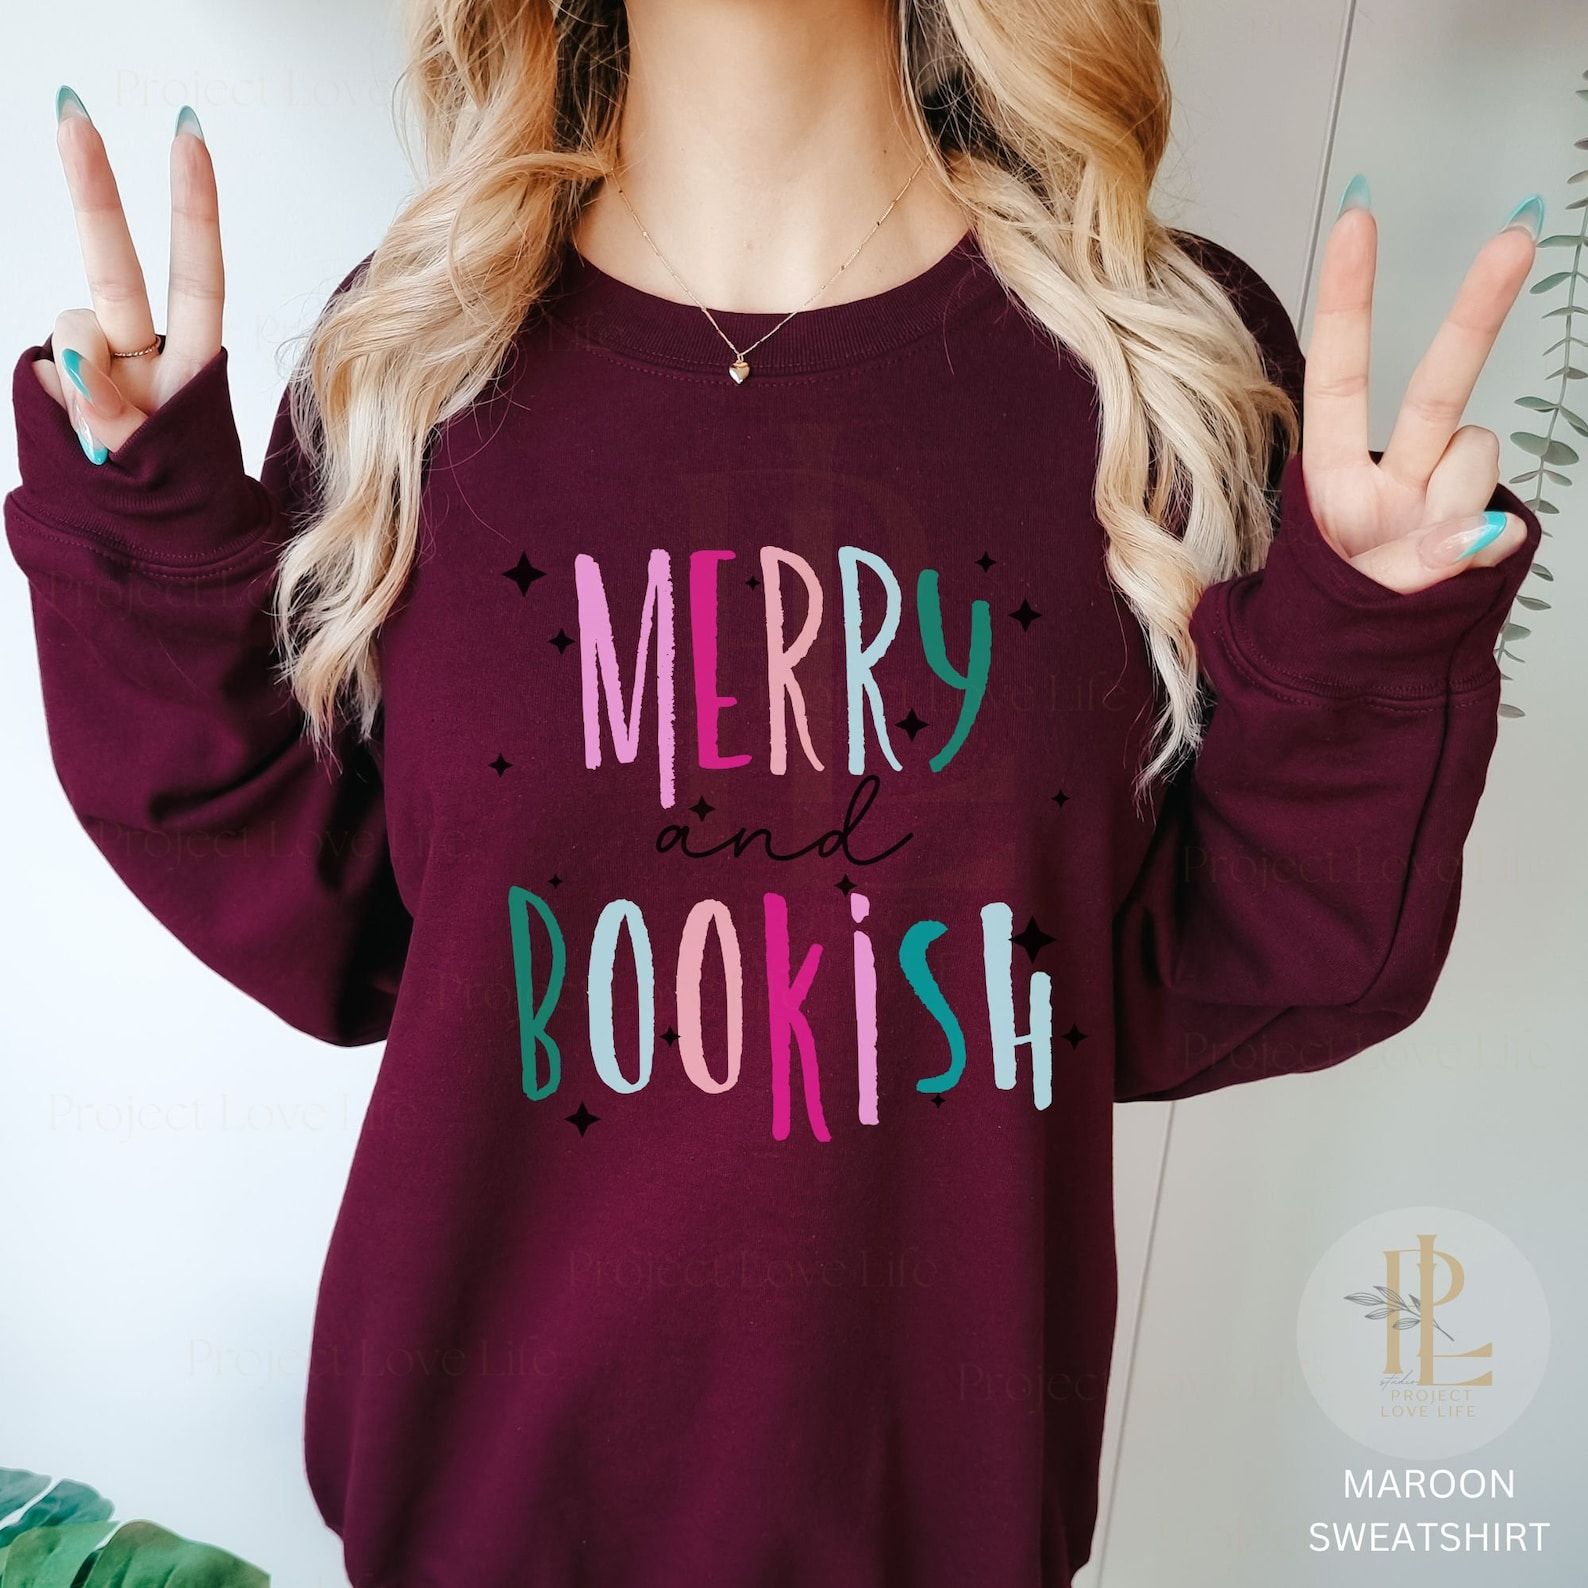 Maroons sweatshirt that reads "Merry and bookish"